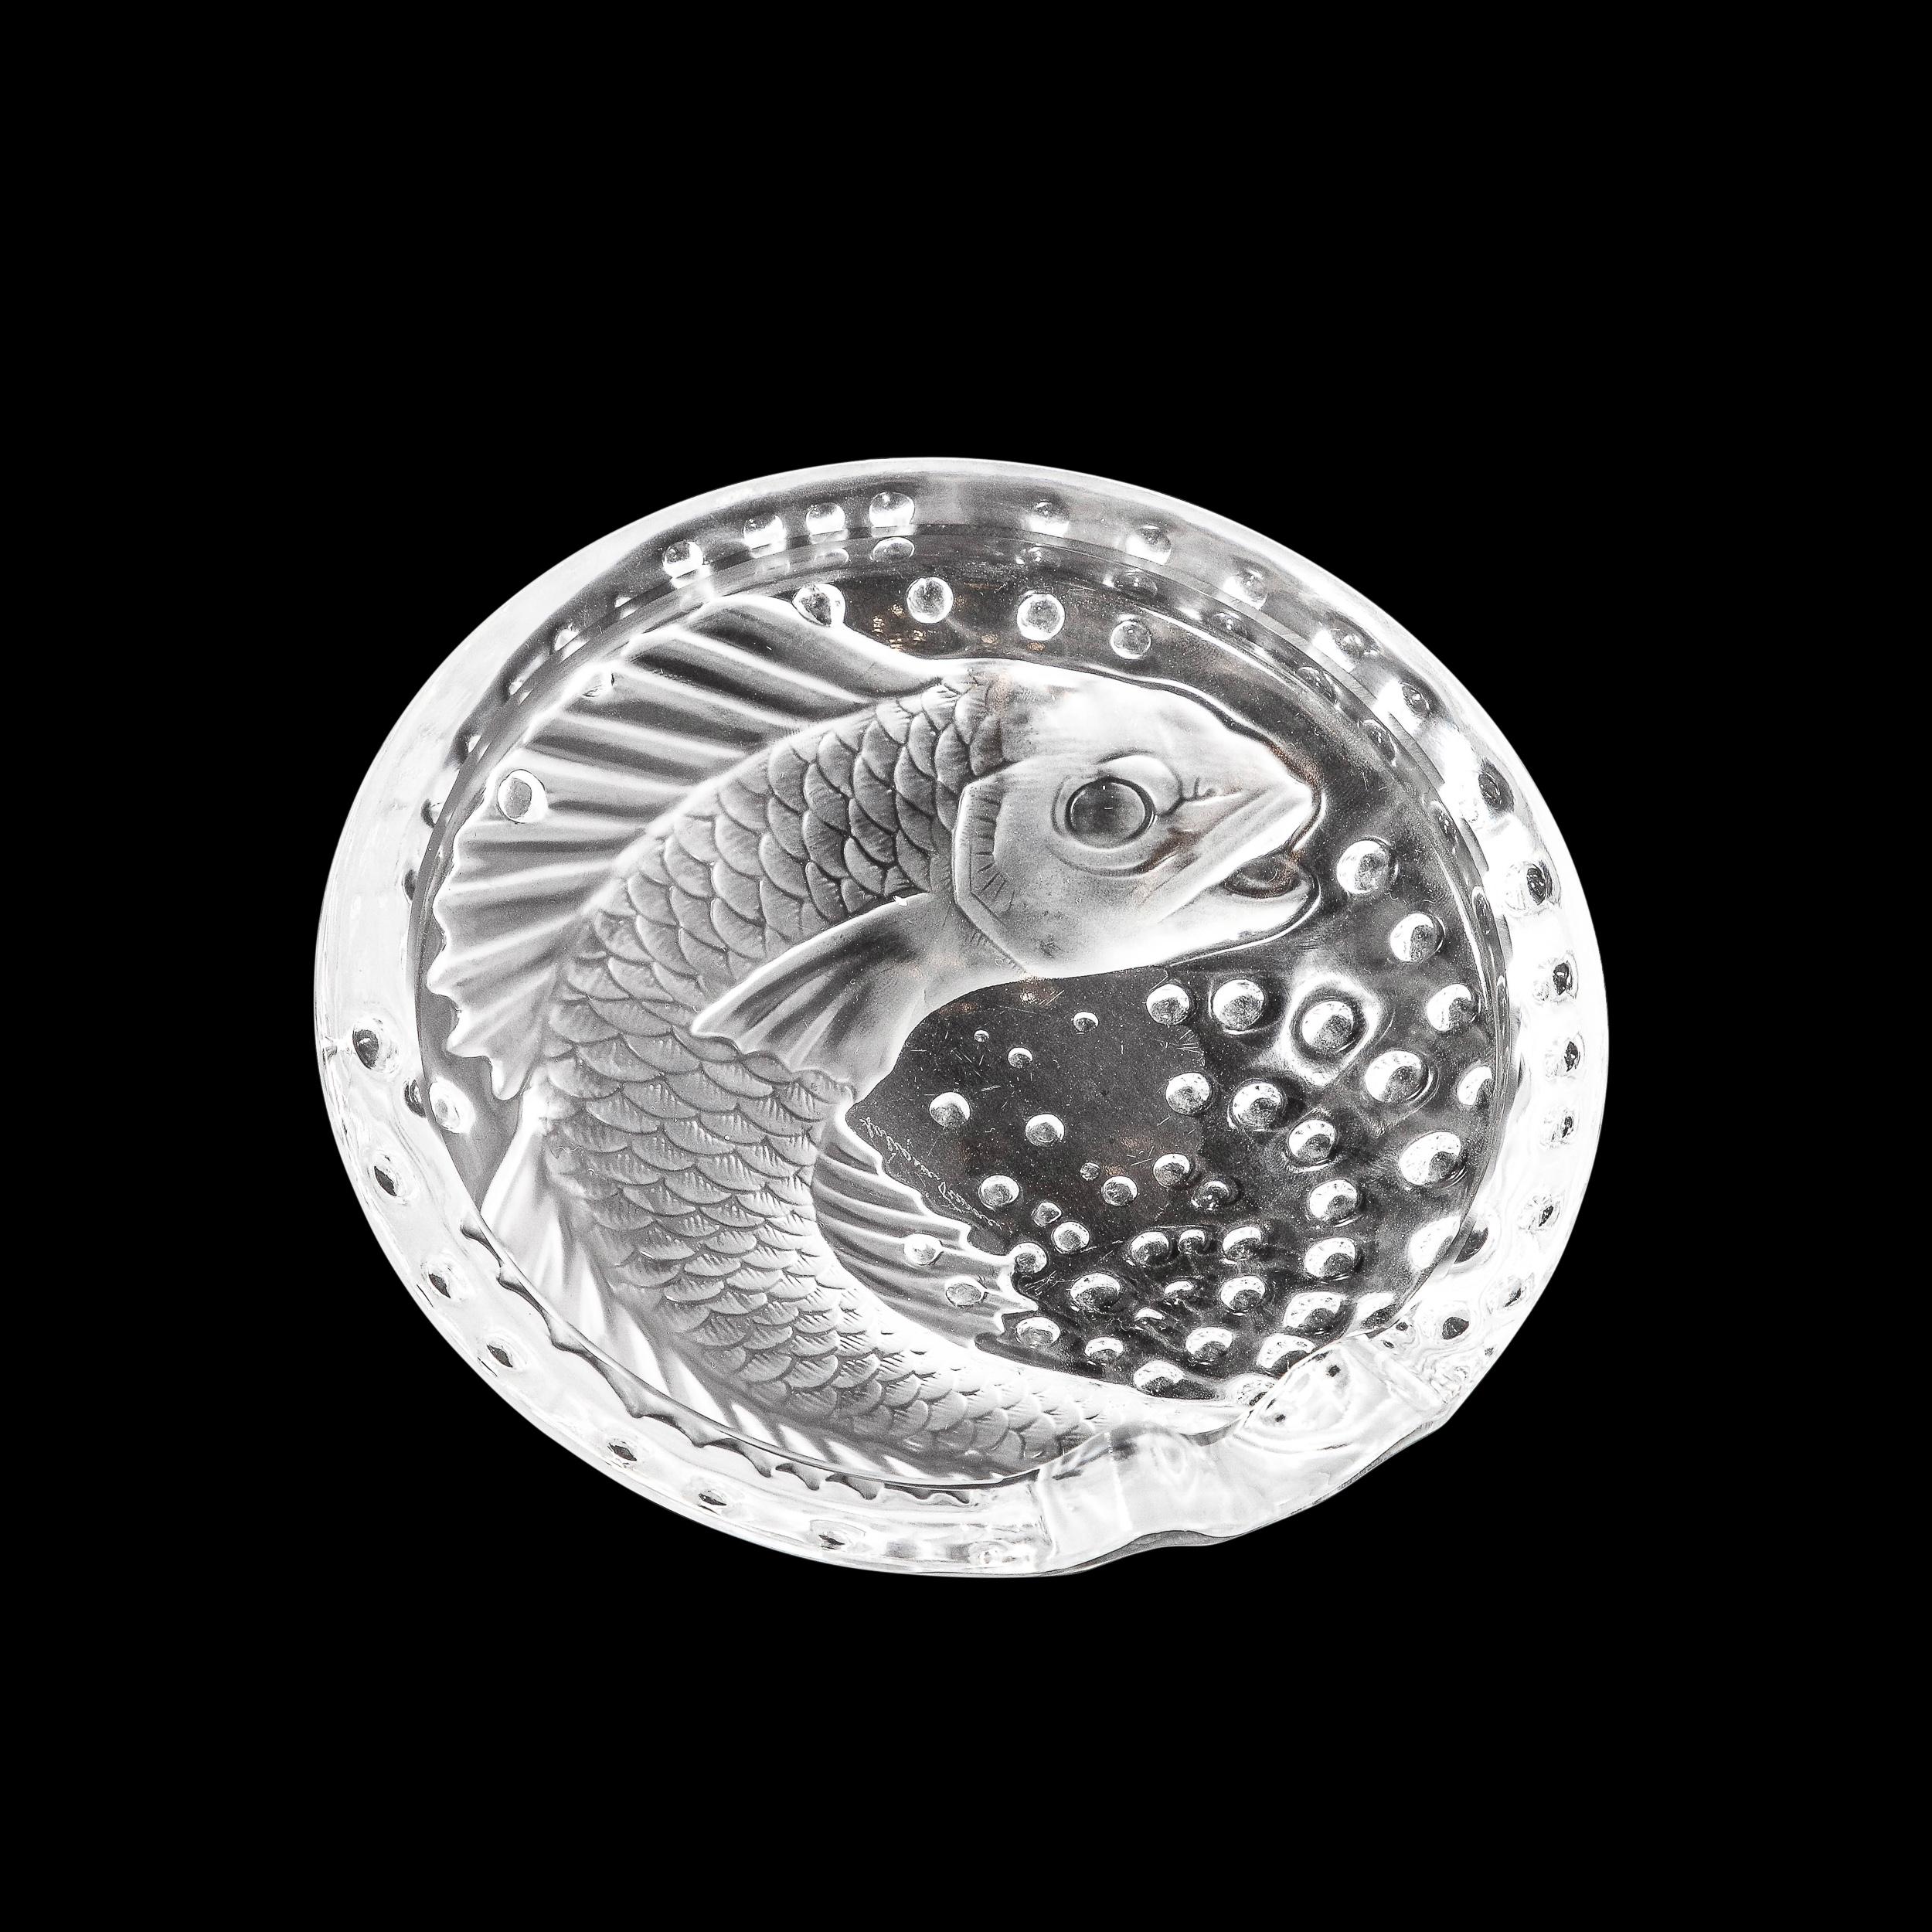 This stunning modernist Art Deco style relief glass decorative dish was realized during the 20th century by the legendary French maker Lalique- one of the finest purveyors of glass products on earth since 1888. This piece features a concave center